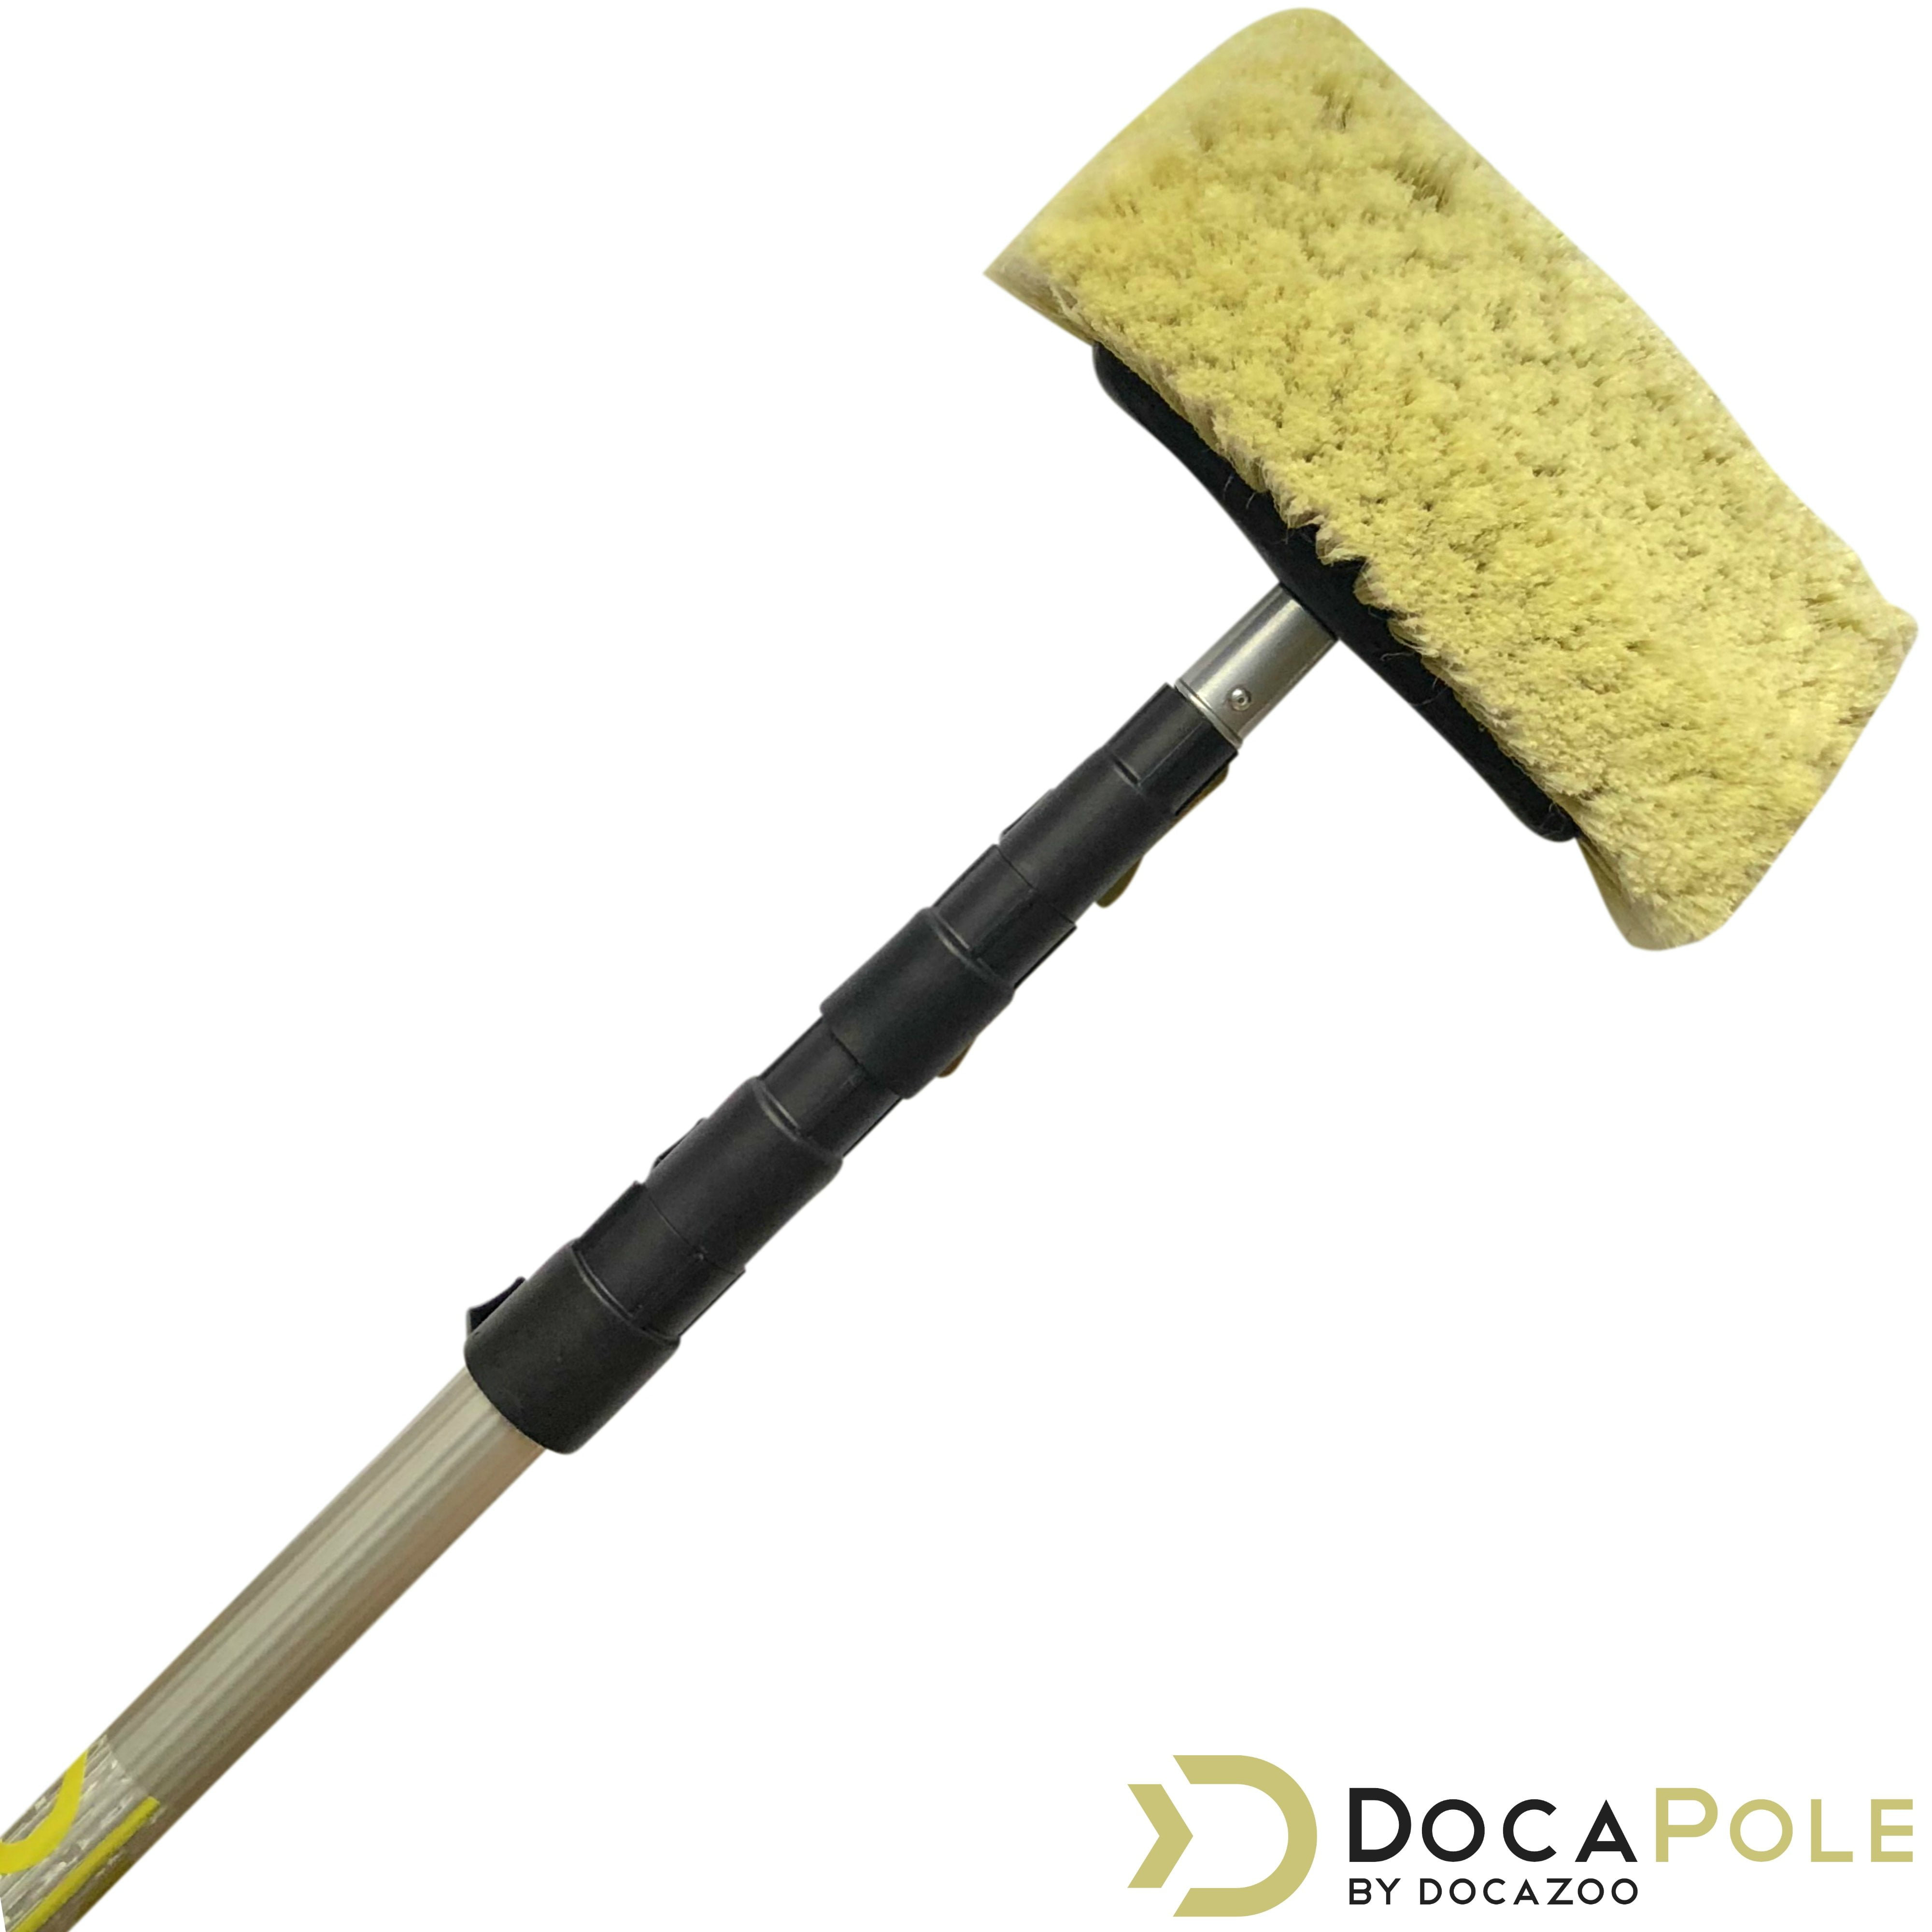 Docazoo DocaPole 6-24 Foot (30 ft Reach) Extension Pole and 11A Hard Bristle Brush for House Siding, Deck, Garage, Patio and More